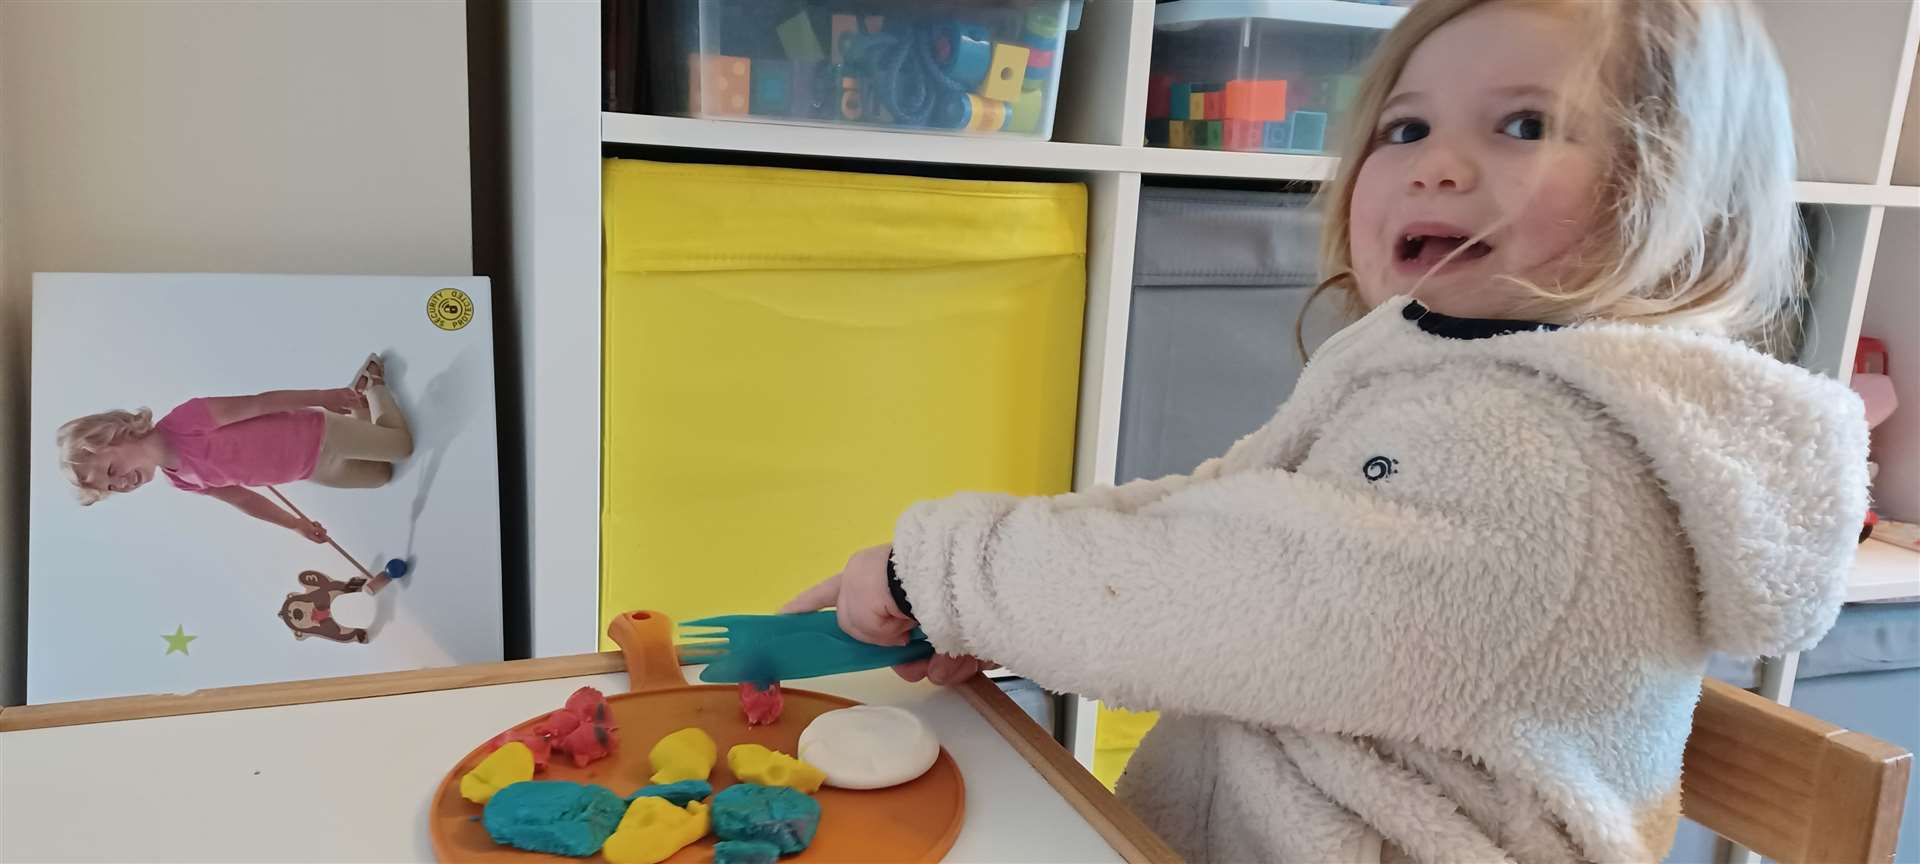 Learning how to cut food with the help of a plate of Playdoh